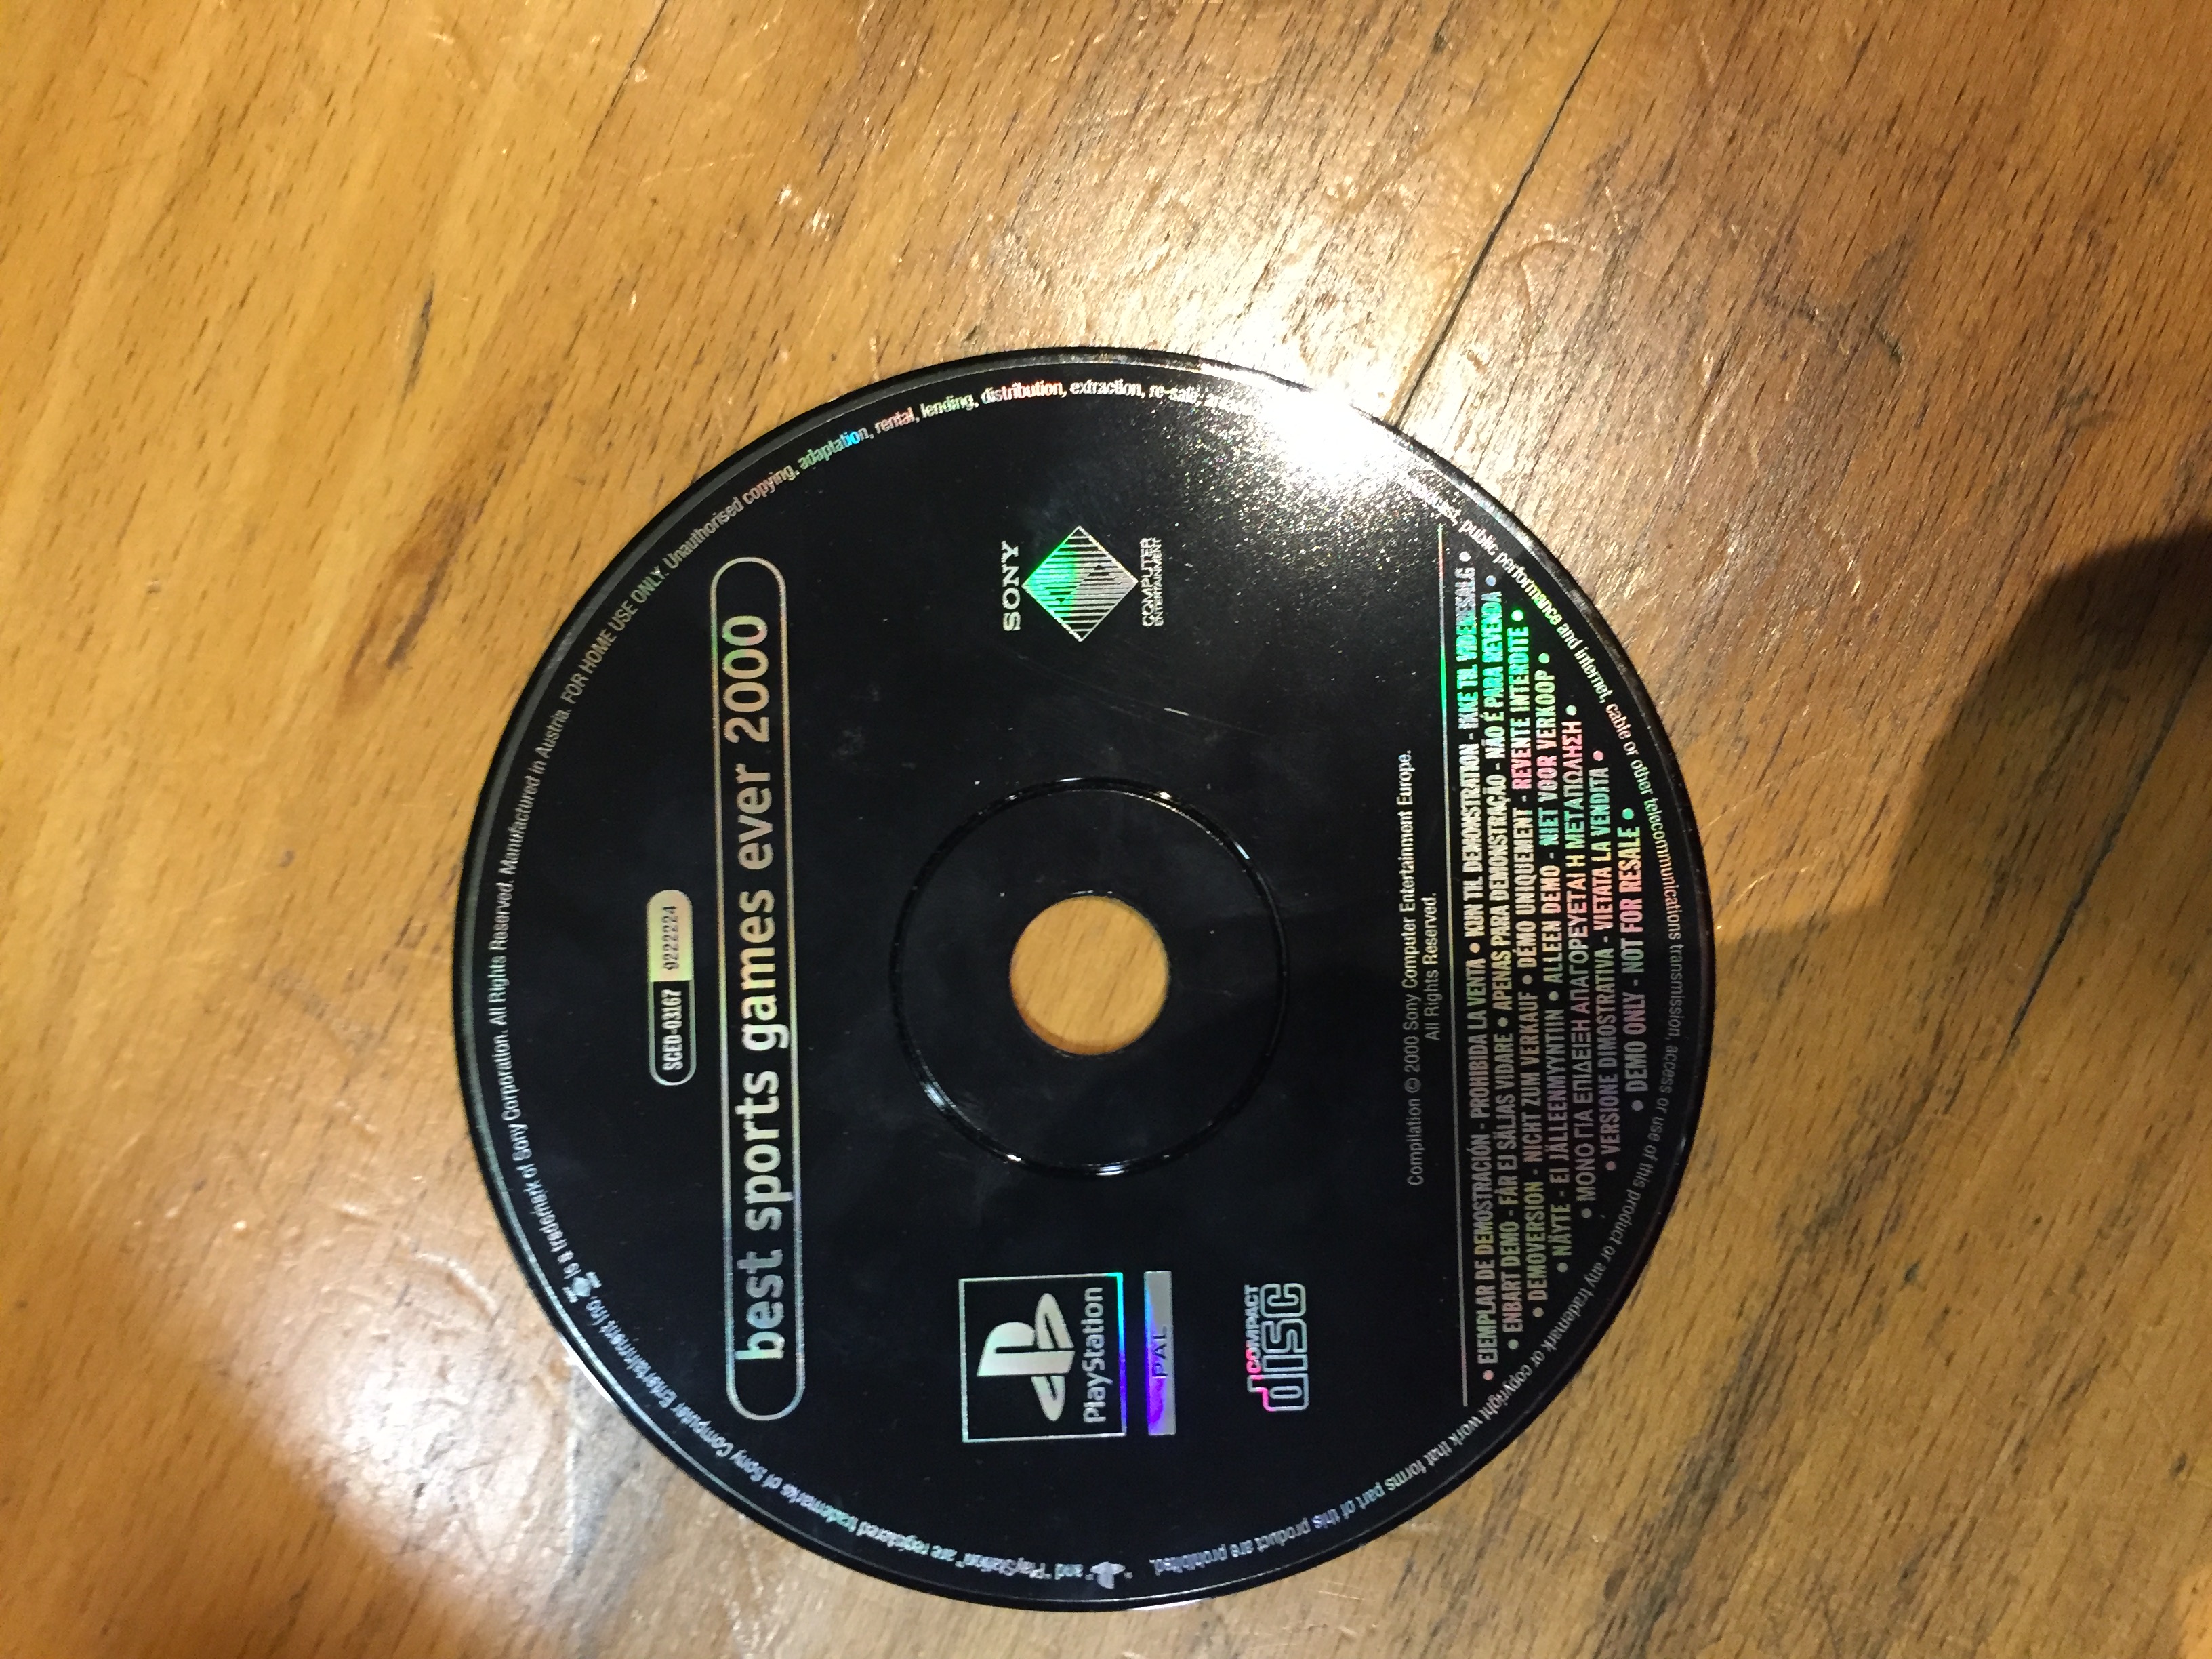 Best Sports Games Ever 2000 CD - PAL